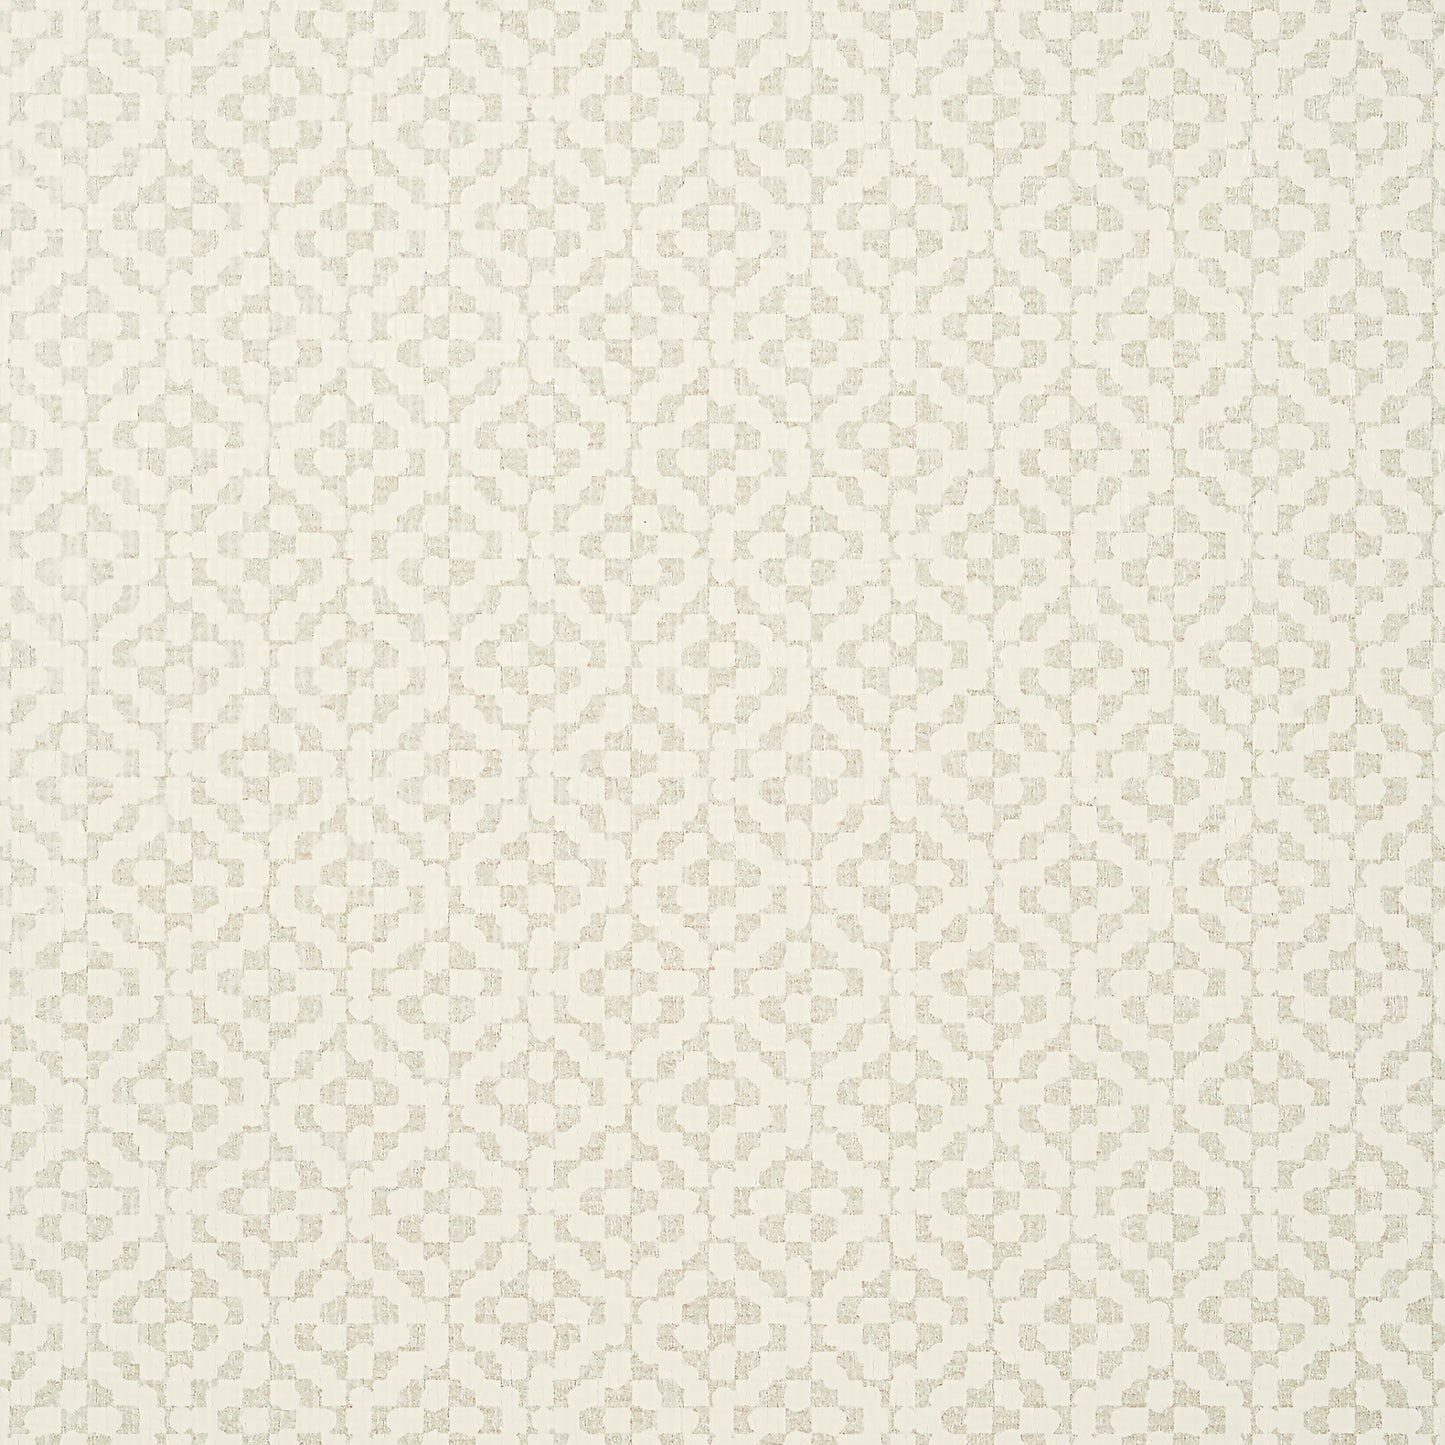 Purchase  Ann French Wallpaper Item# AT9610 pattern name  Riva